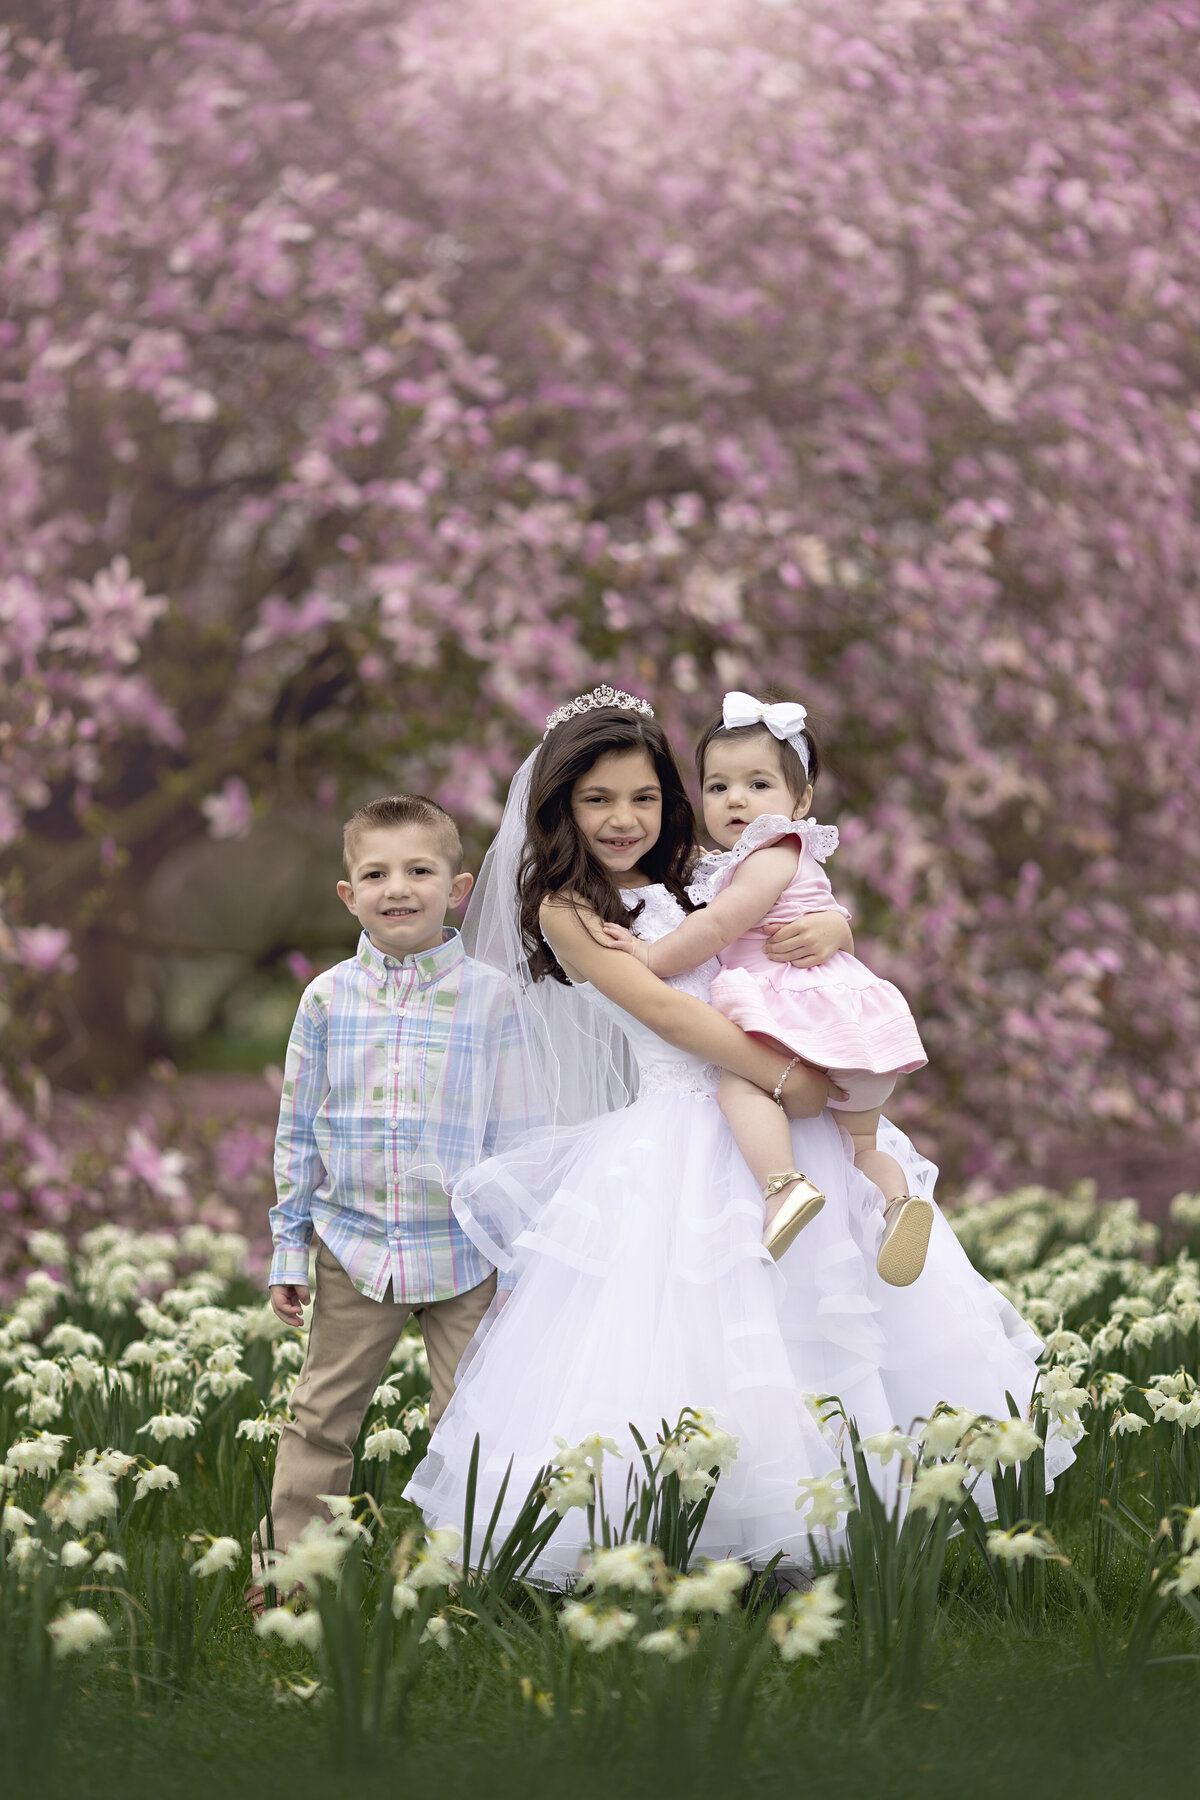 Three sibling stand in wildflowers in front of pink flowering trees